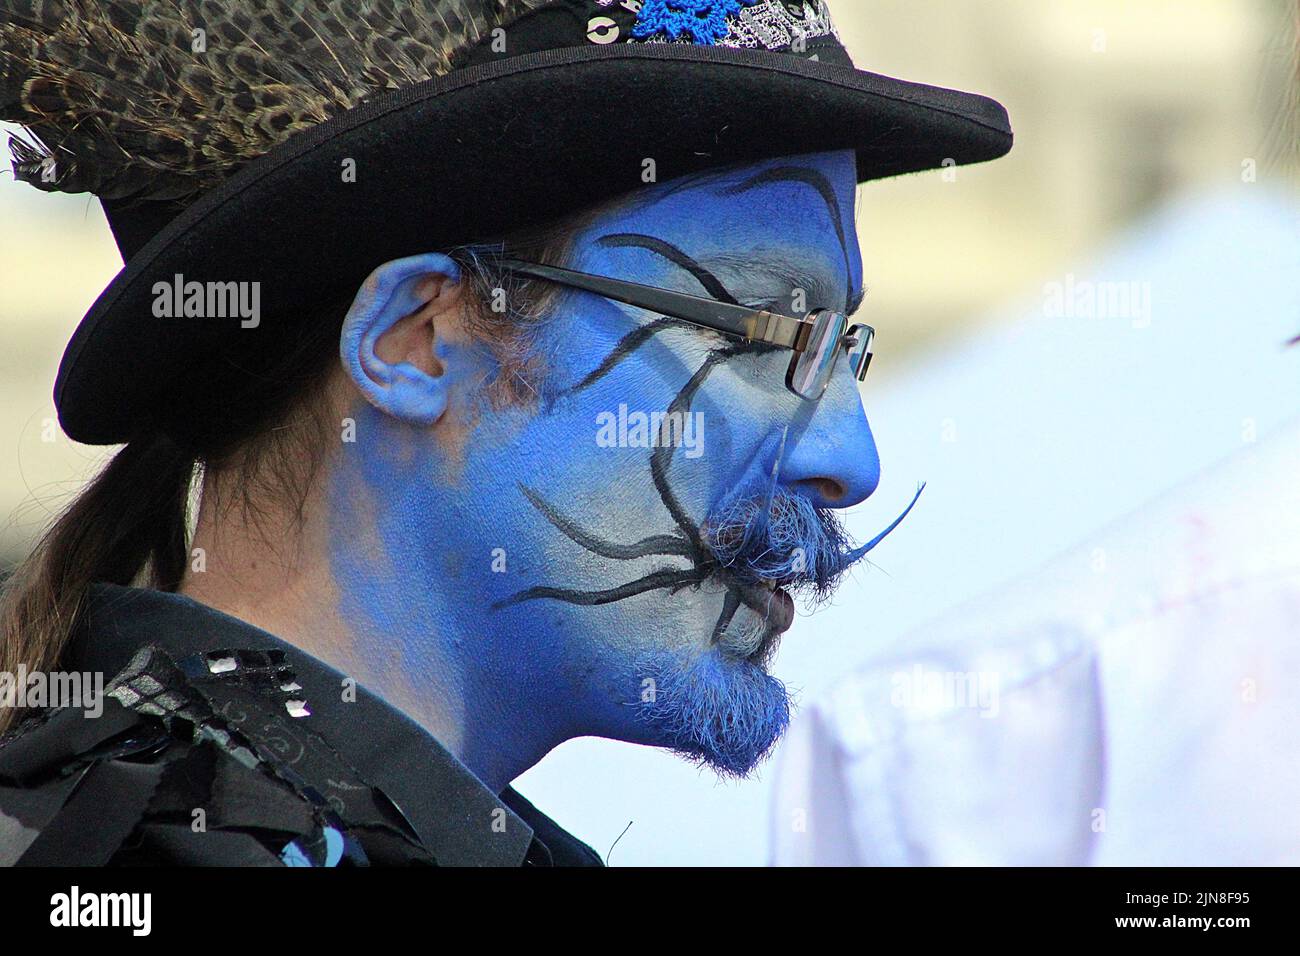 SIDMOUTH, DEVON, UK - AUGUST 8, 2017 Sidmouth Folk Festival performers from Boggart's Breakfast with painted blue faces and black clothes Stock Photo